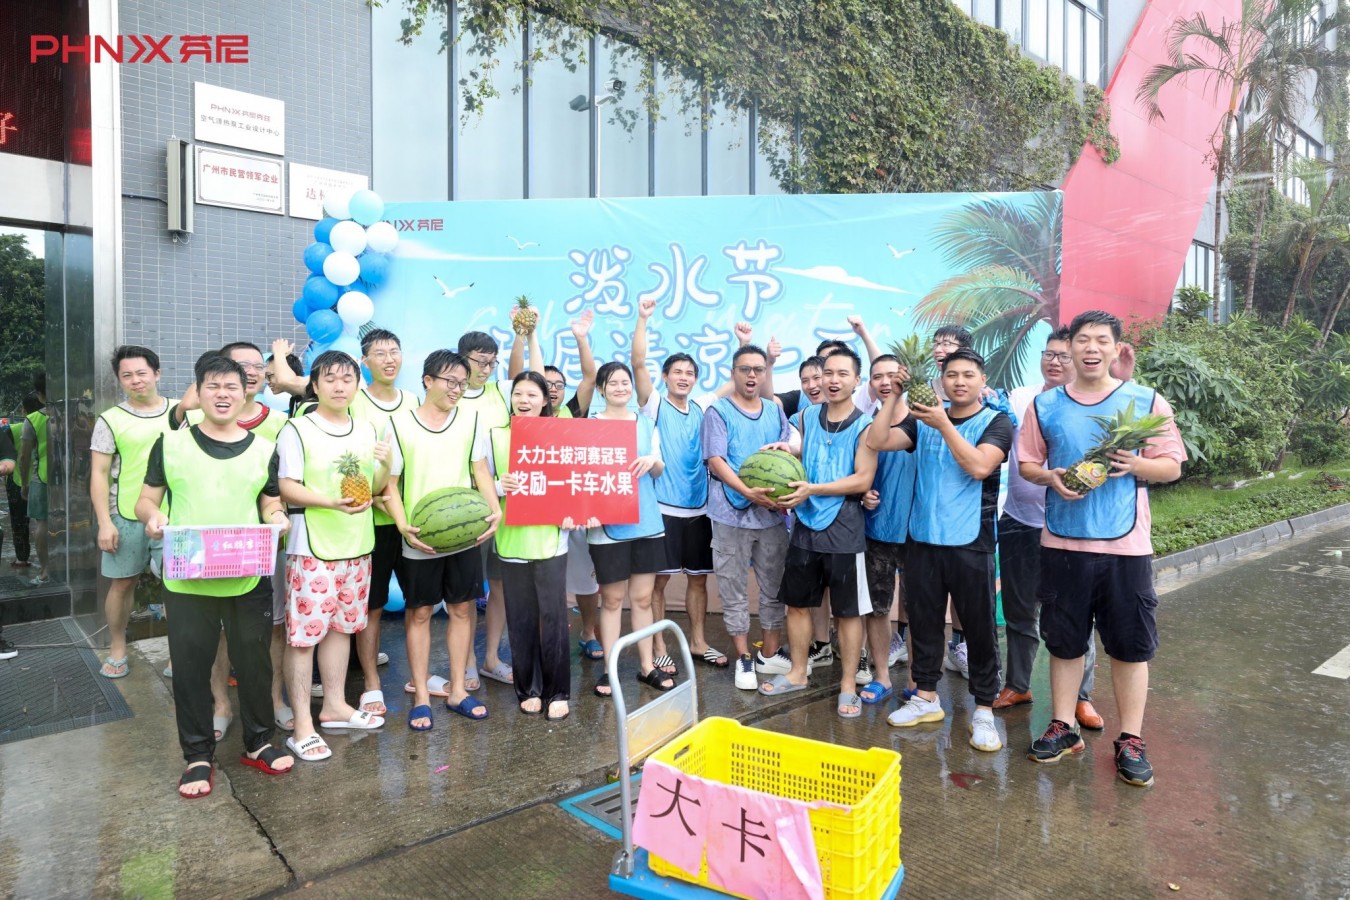 Fun Games and Family Get-together——The Water Fun Party in PHNIX Has It All